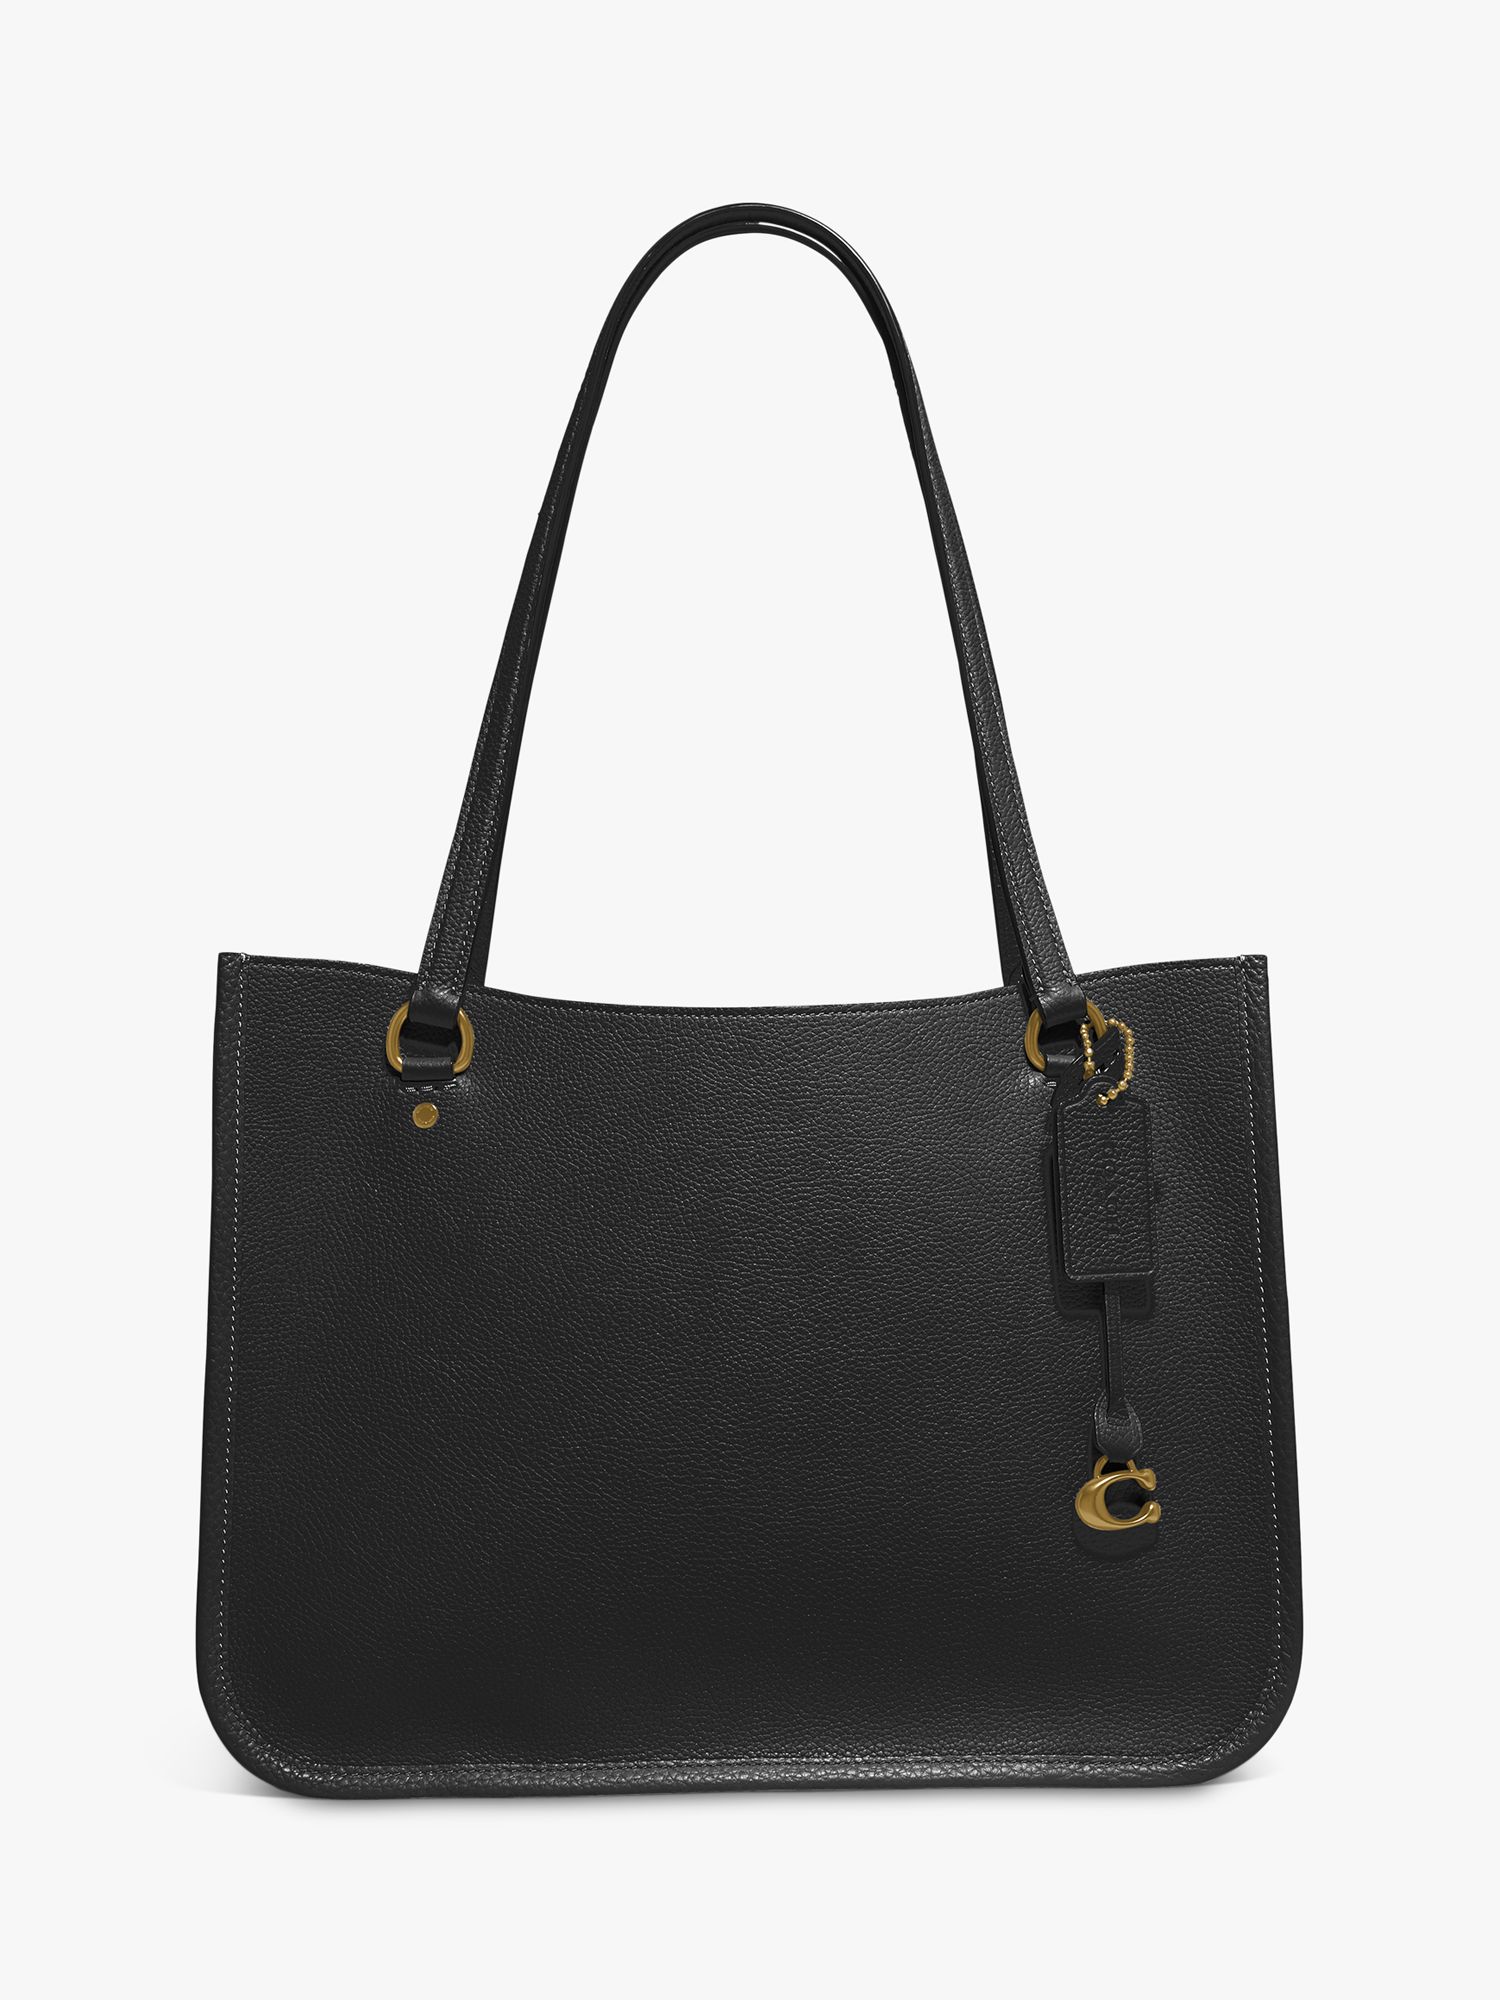 Coach Tyler Leather Tote Bag, Black at John Lewis & Partners